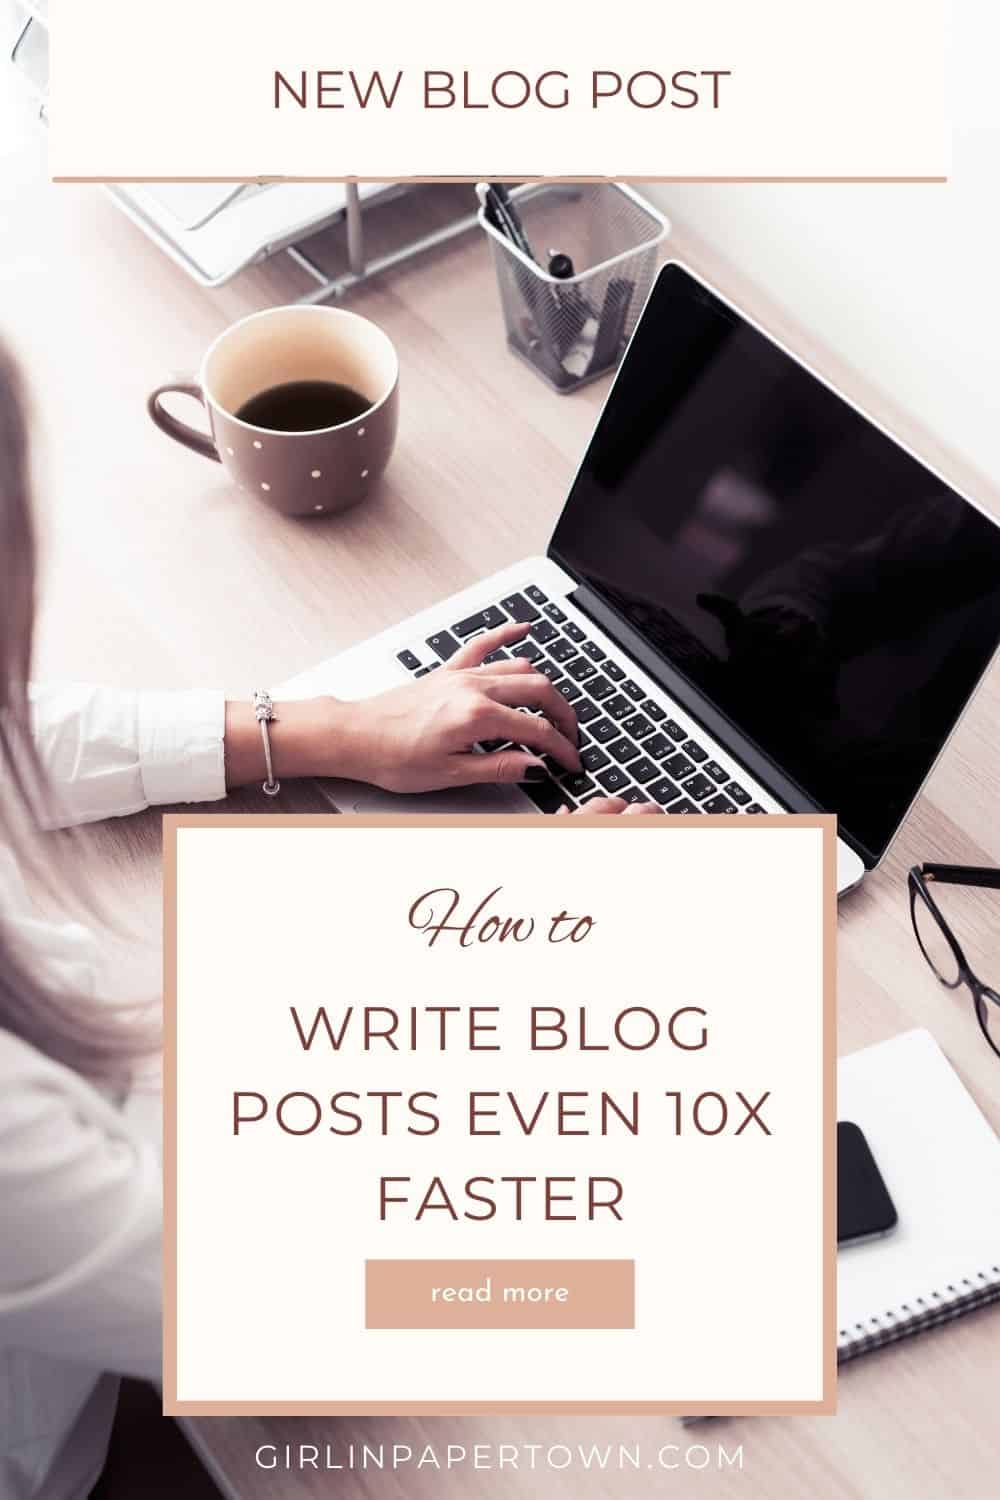 Starting a blog - How to write blog posts even 10x faster